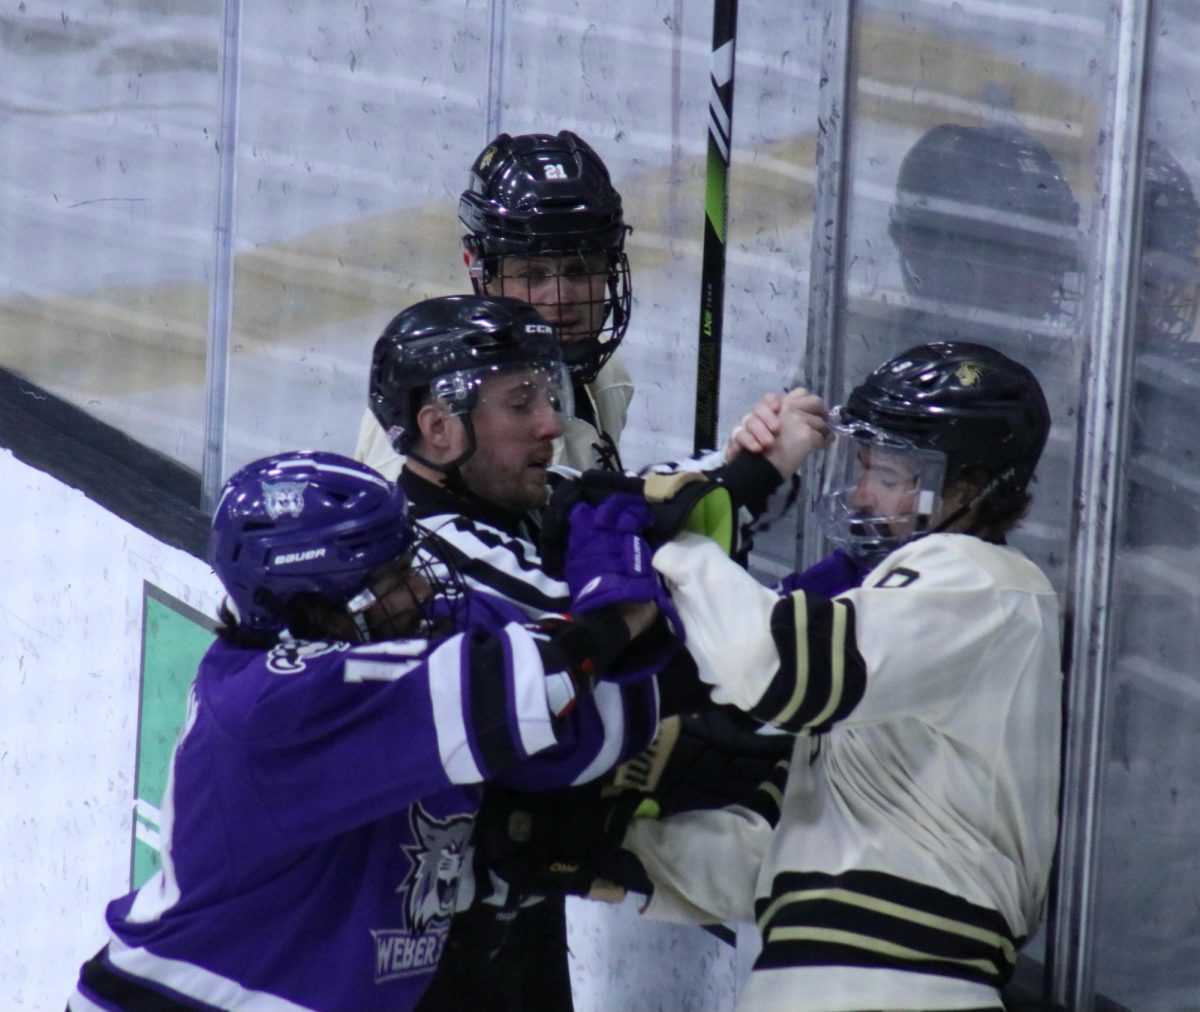 The Lions’ Austin Meers is pushed against the glass during a fight against Weber State.